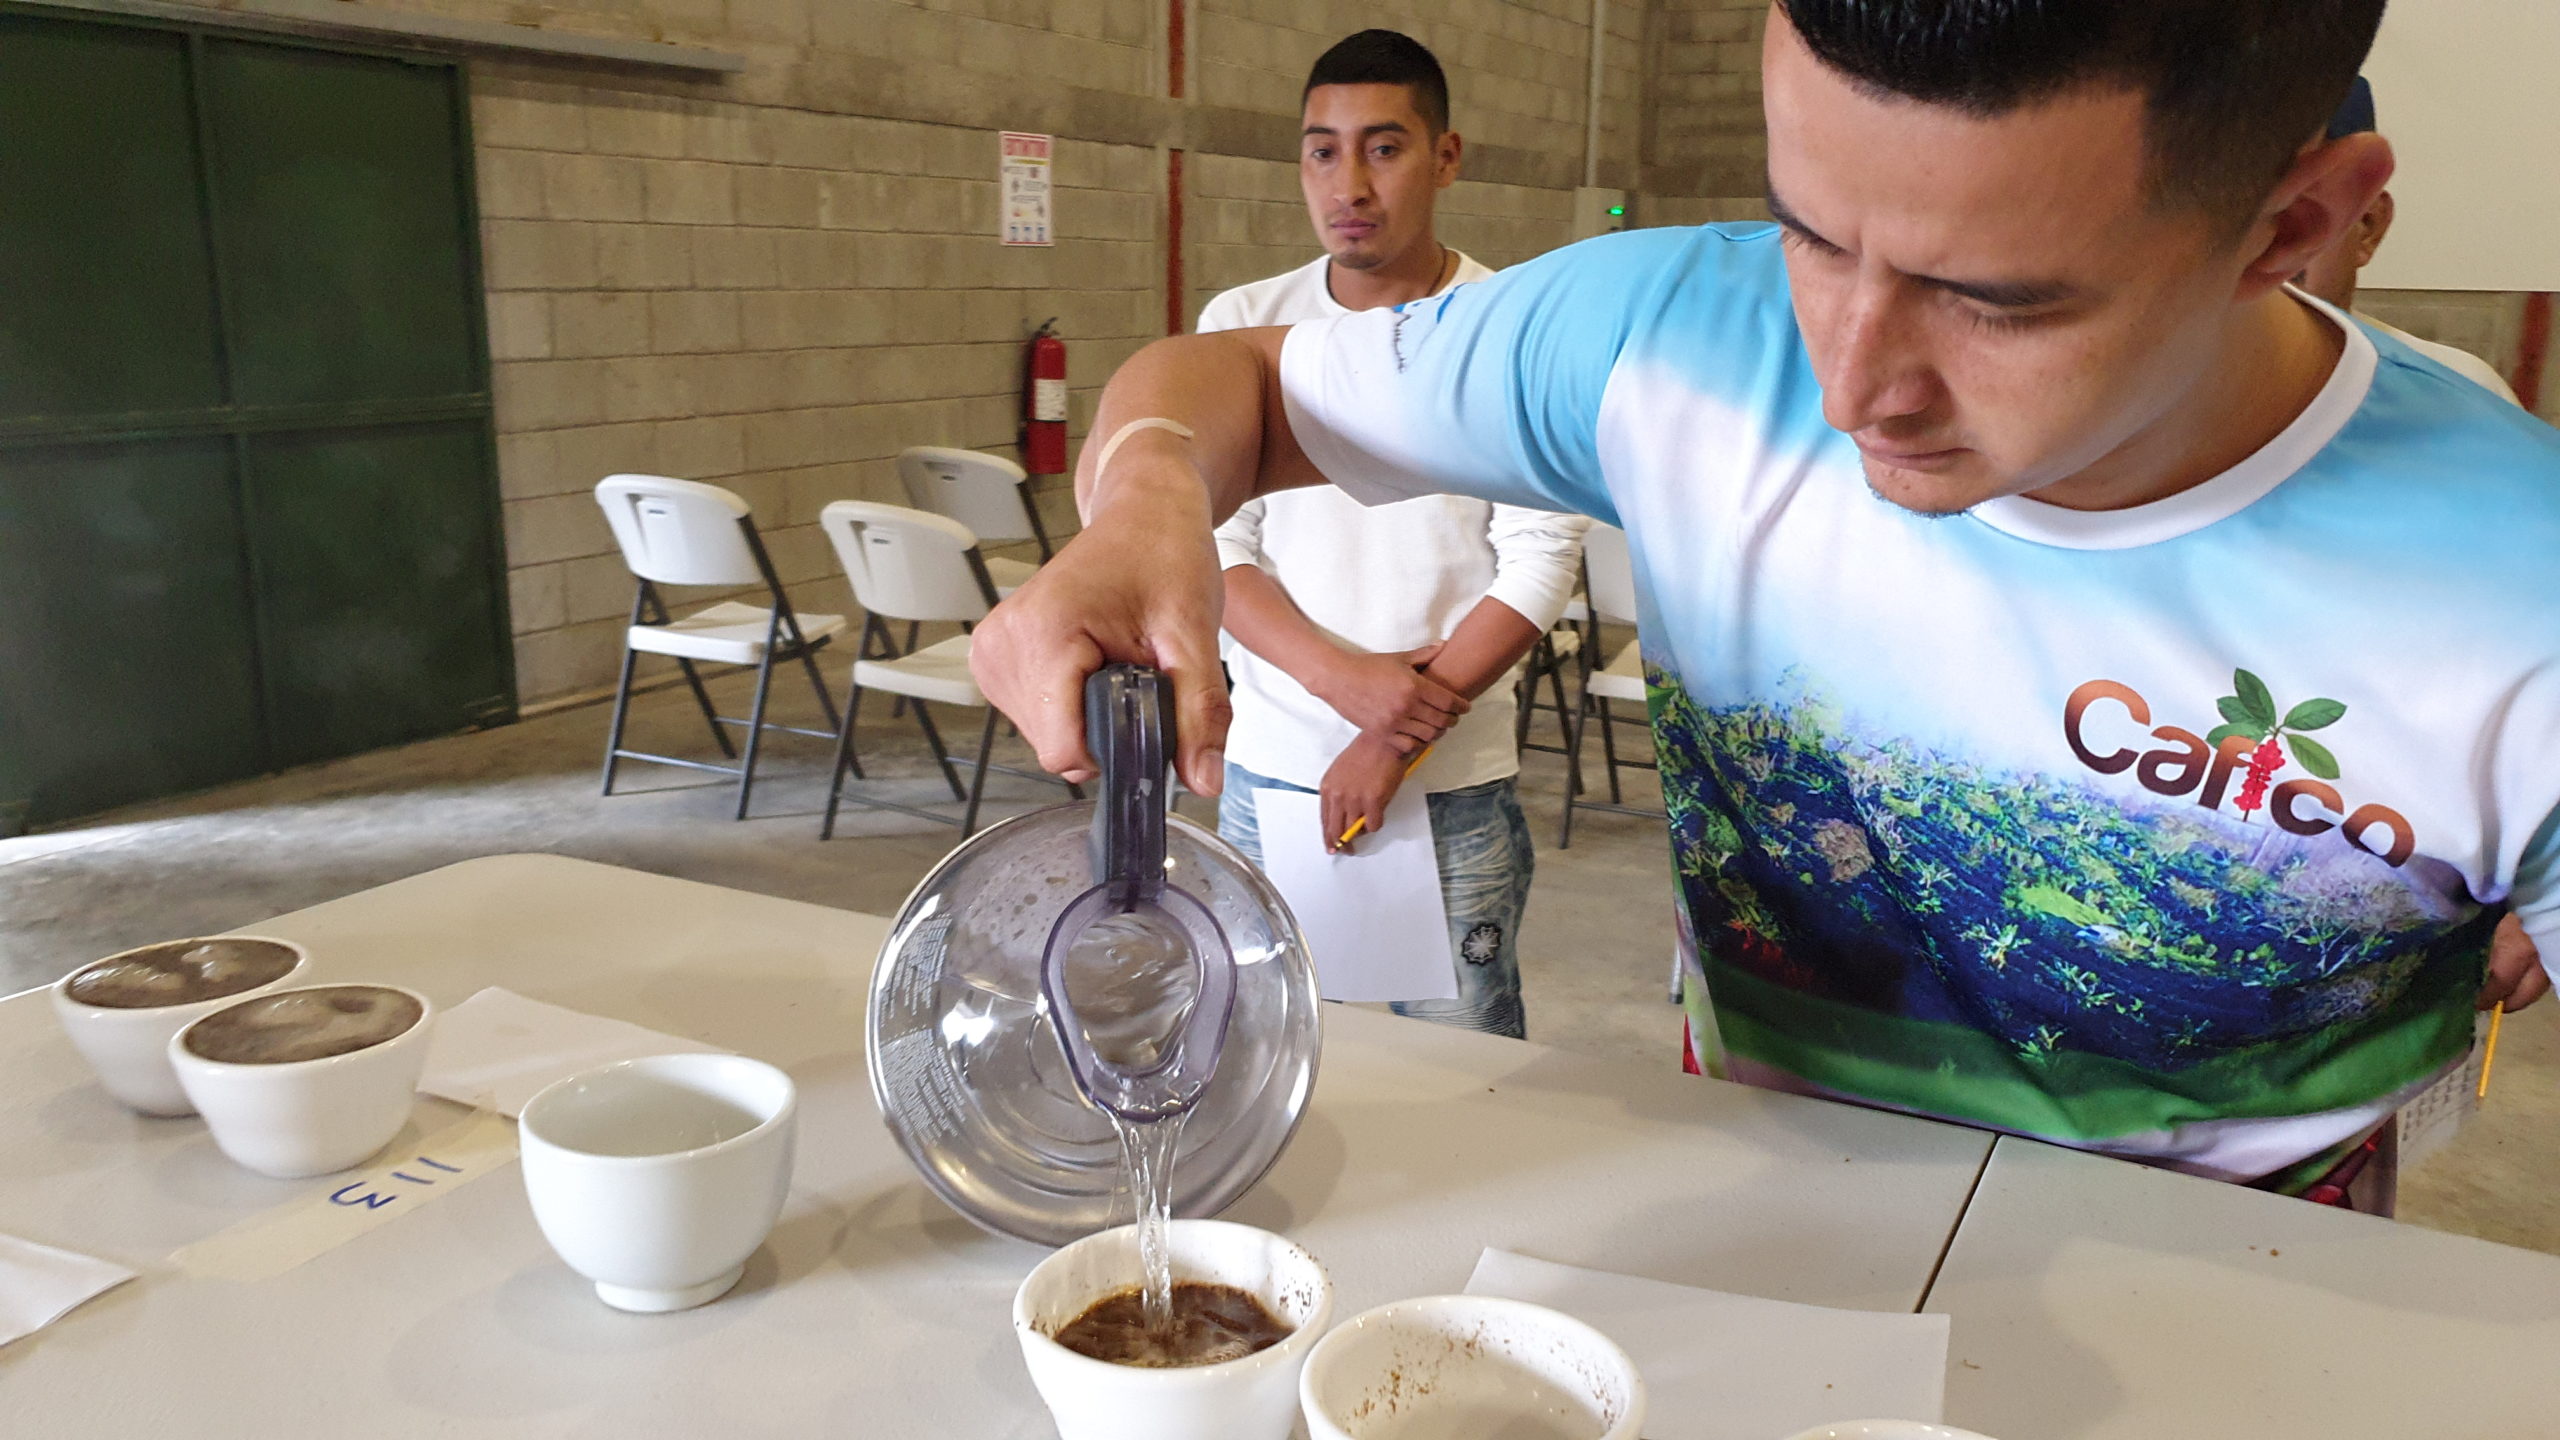 A participant sets up a cupping table as part of the sensory analysis portion of the event.